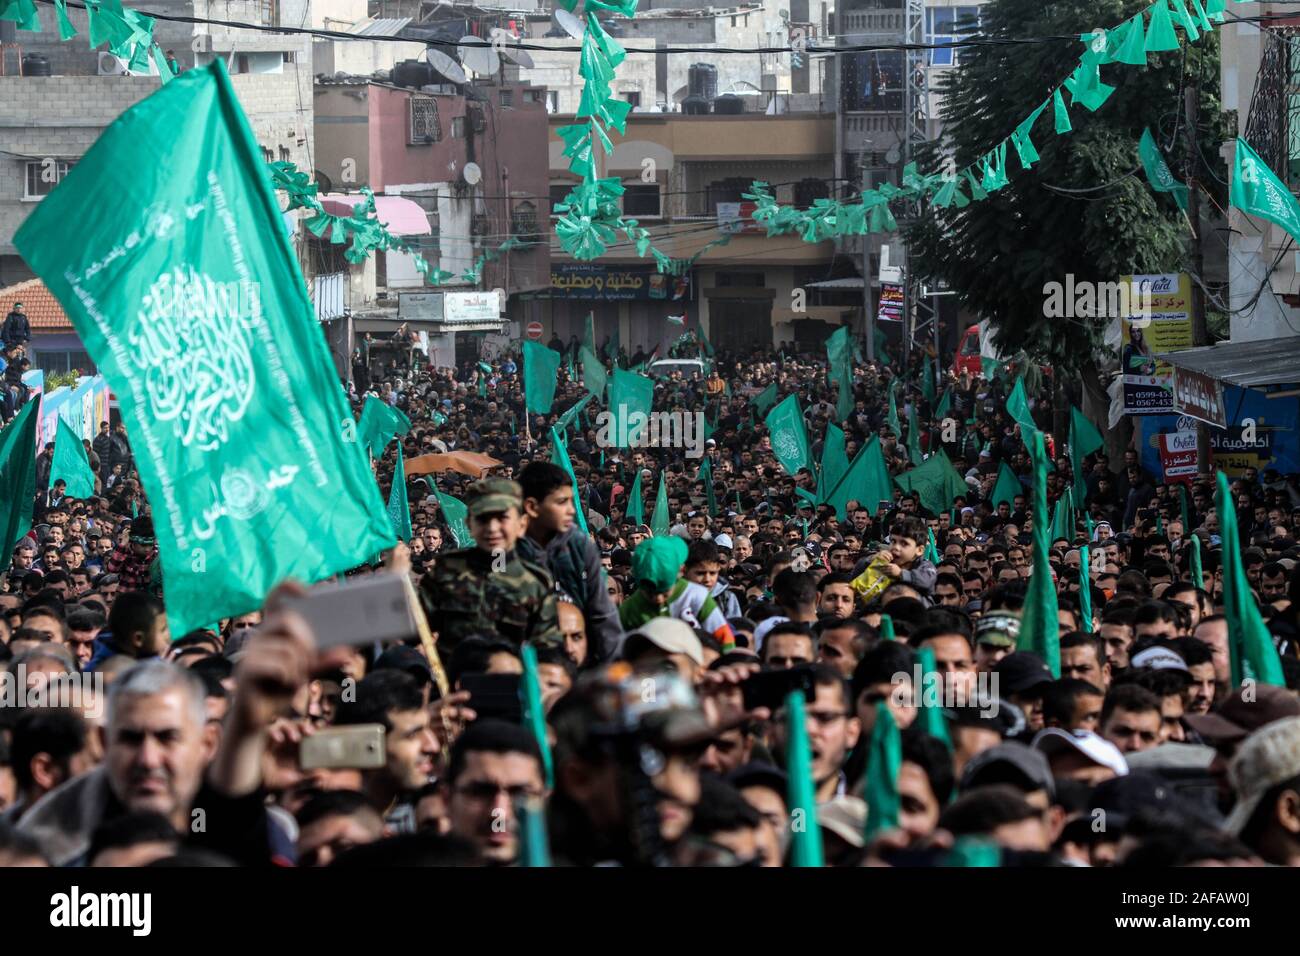 December 13, 2019: Gaza, Palestine. 13 December 2019. The Palestinian Islamic resistance movement of Hamas hold a rally to celebrate the 32th anniversary of its foundation, in the Jabalia refugee camp in the northern Gaza Strip. Hamas political bureau member, Fathi Hamad, delivered a speech at the event, which was titled ''With the edge of the sword we eliminated falsehood''. Hamas was founded in December 1987, by its late leader Sheikh Ahmed Yassin. Hamas won the 2006 Palestinian legislative elections and assumed administrative control of Gaza in June 2007 (Credit Image: © Ahmad Hasaballah/IM Stock Photo